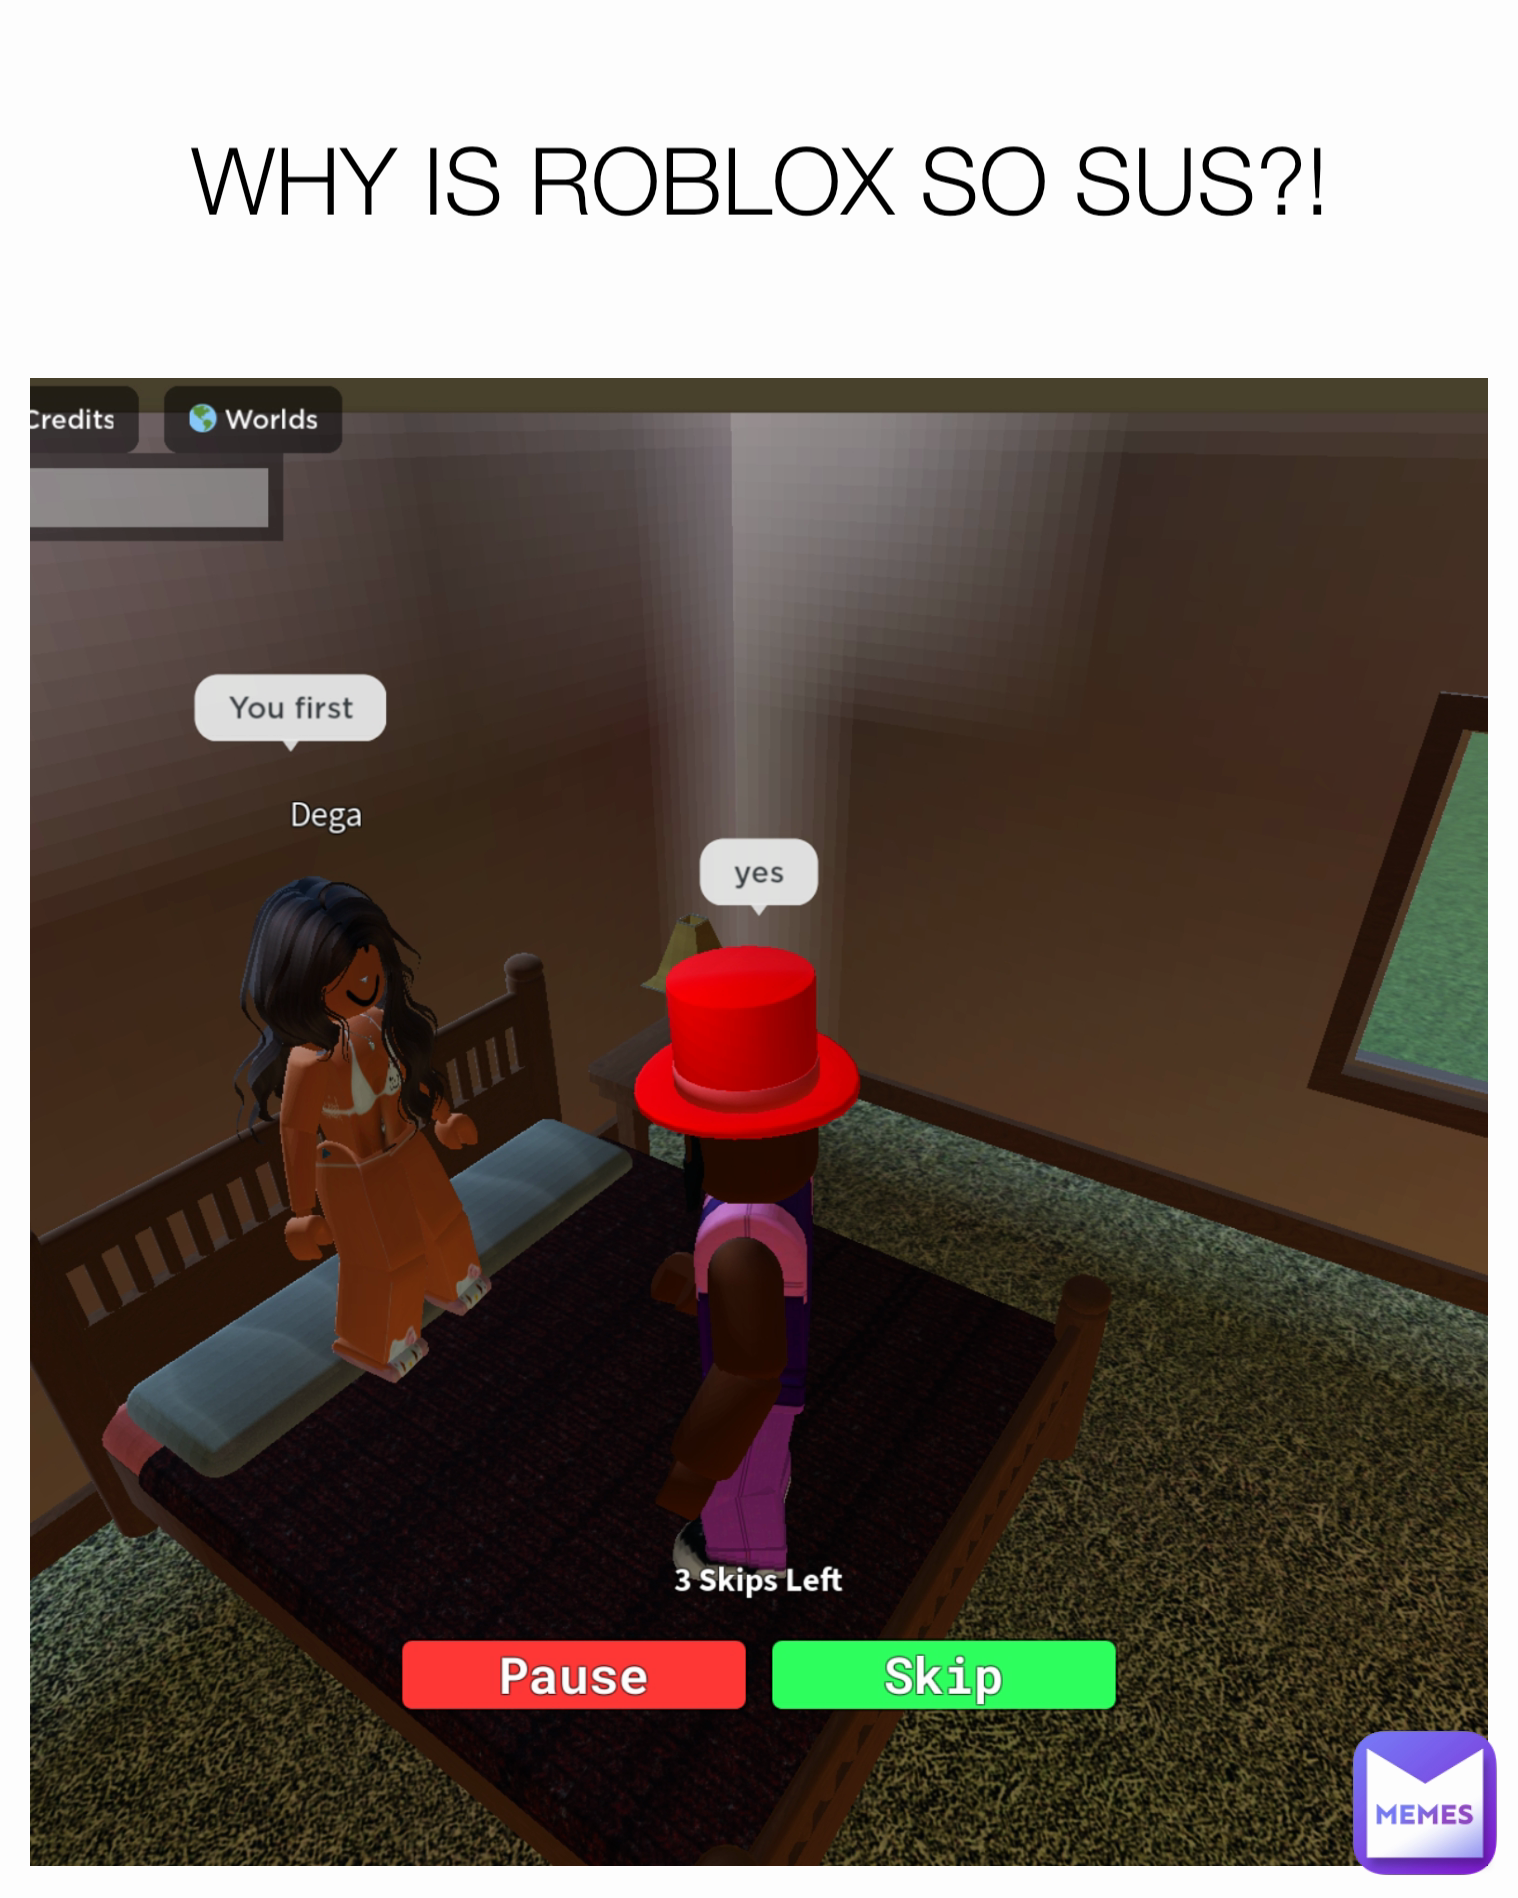 WHY IS ROBLOX SO SUS?!